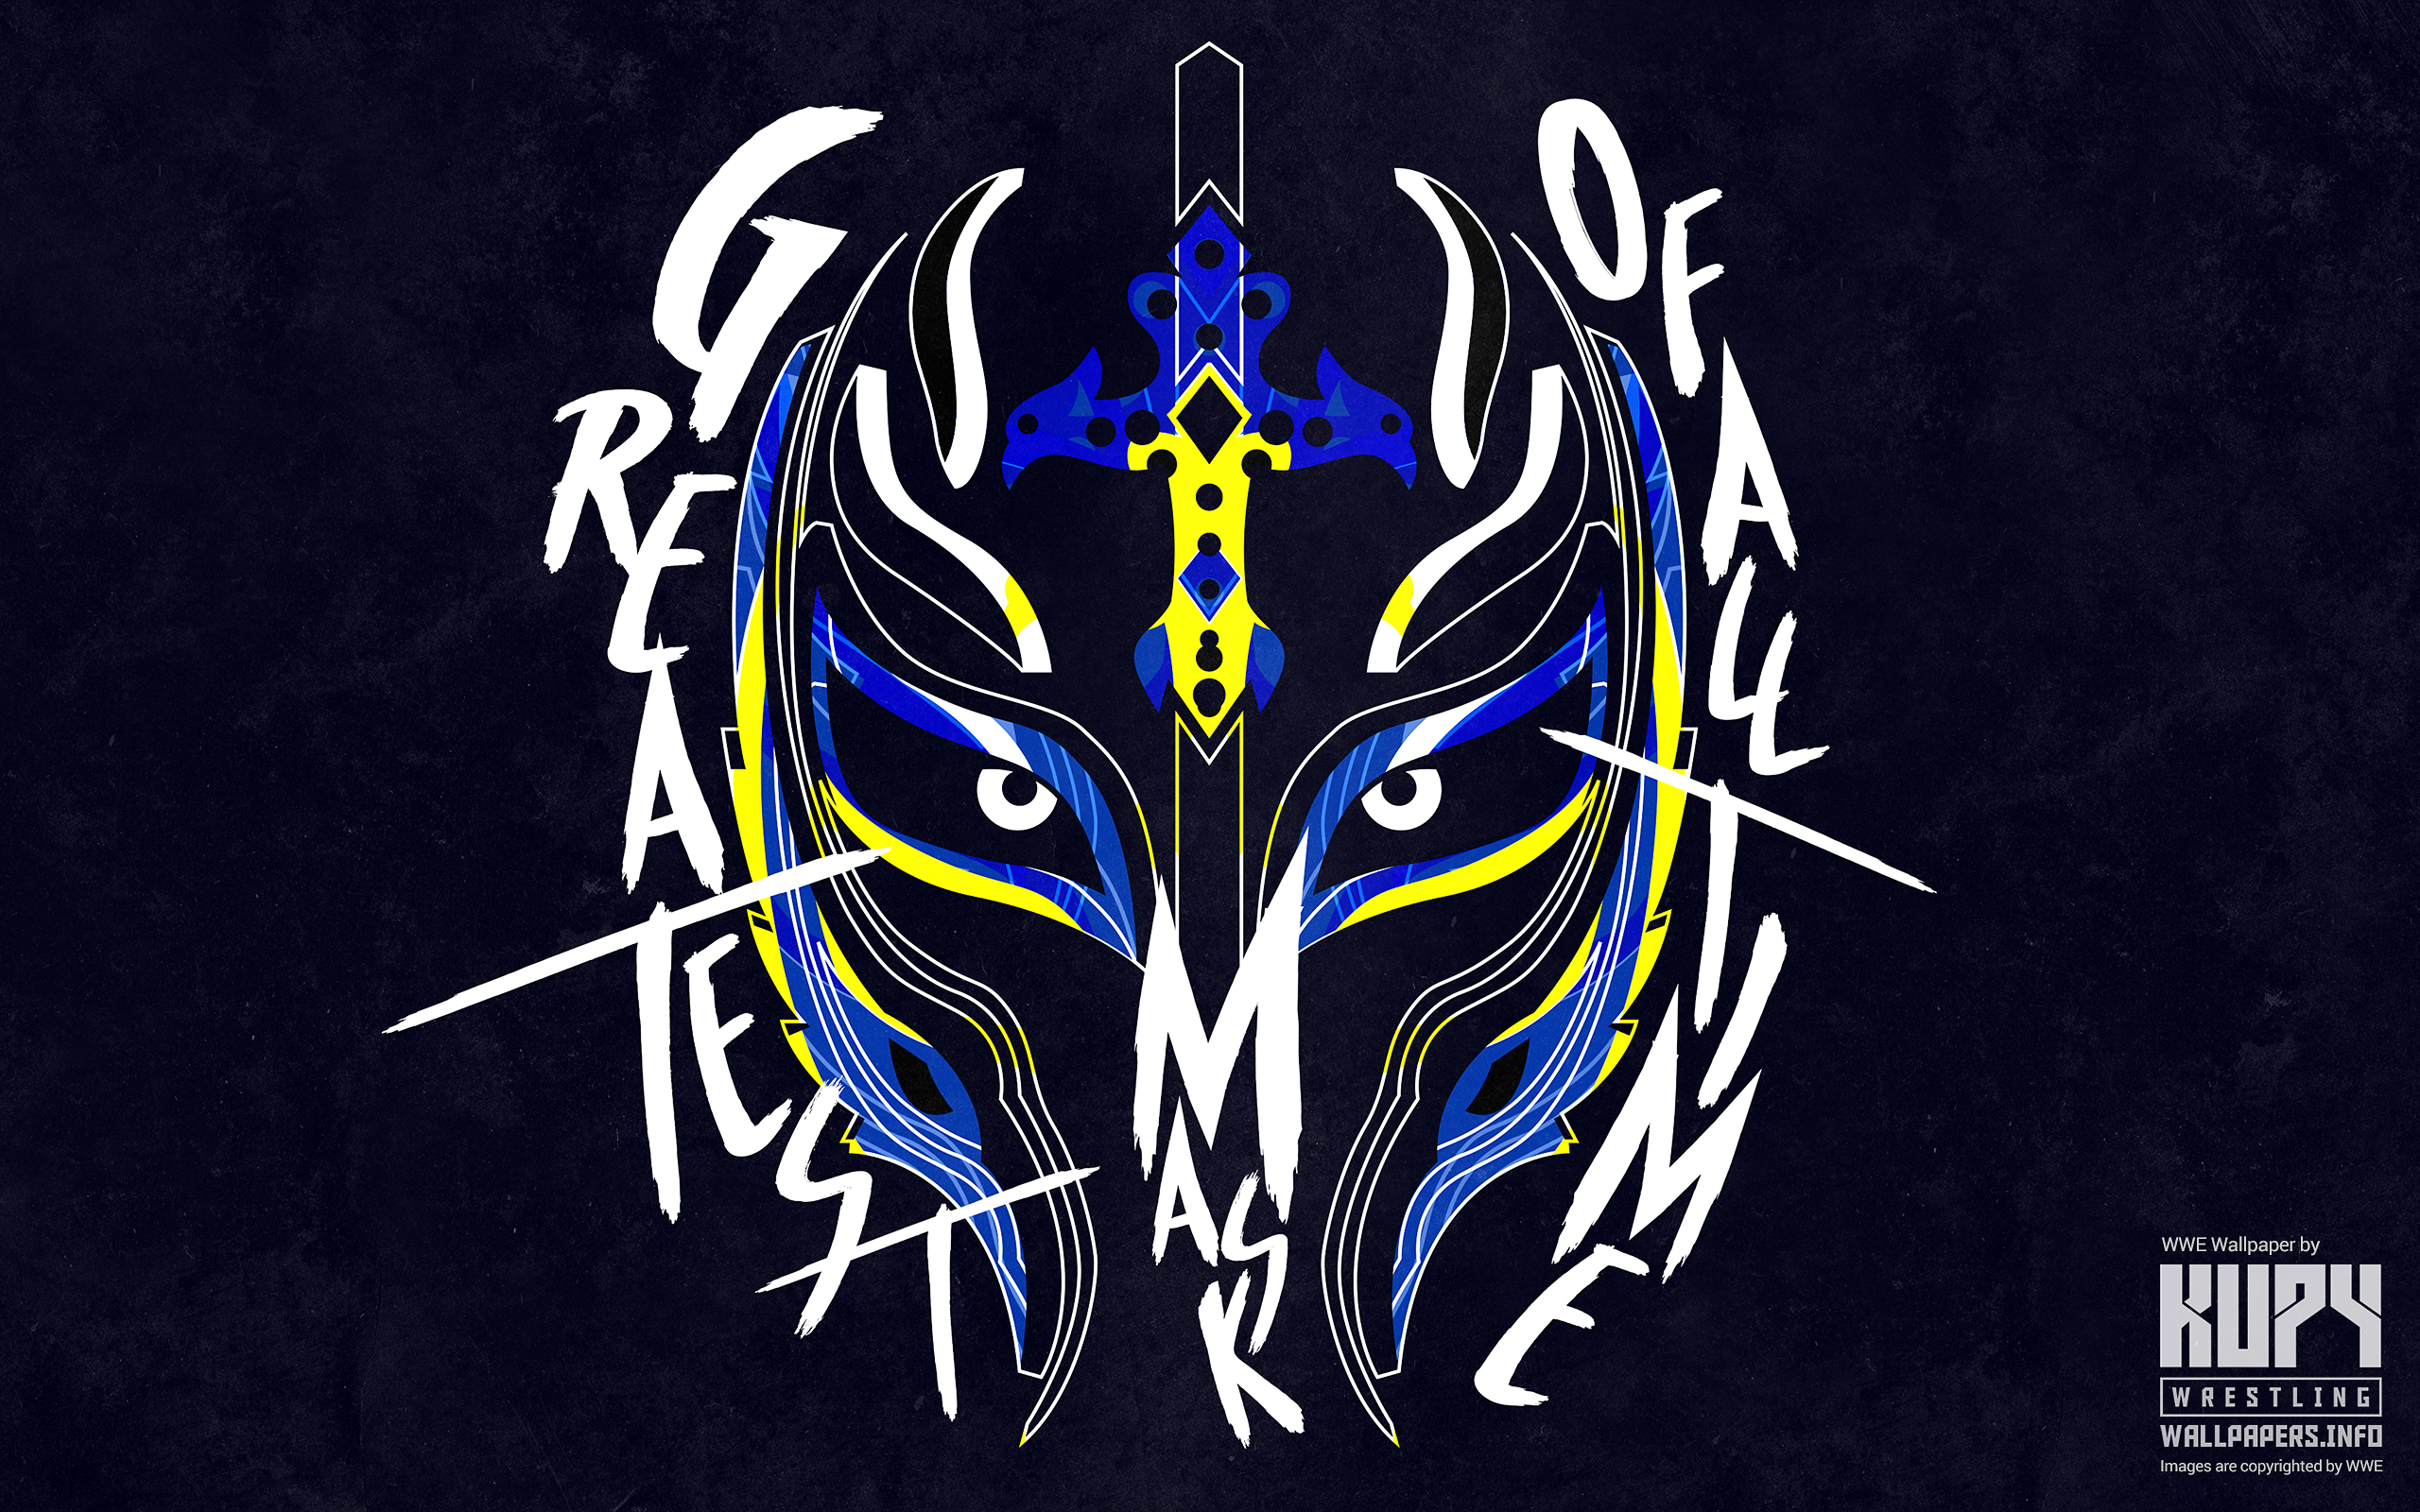 Rey Mysterio Greatest Mask Of All Time wallpaper   Kupy